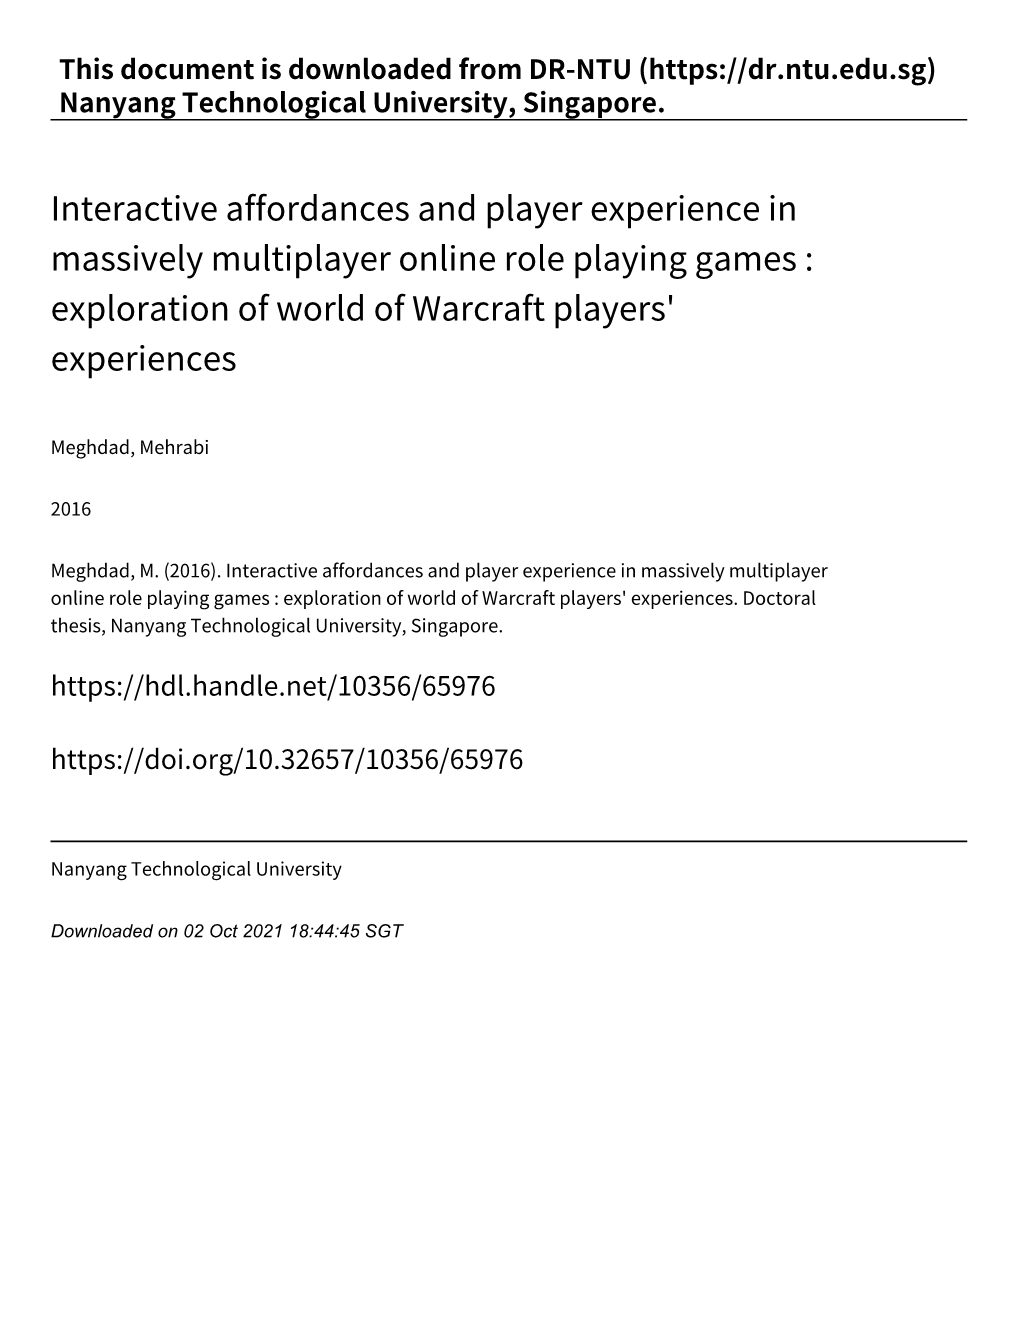 Interactive Affordances and Player Experience in Massively Multiplayer Online Role Playing Games : Exploration of World of Warcraft Players' Experiences